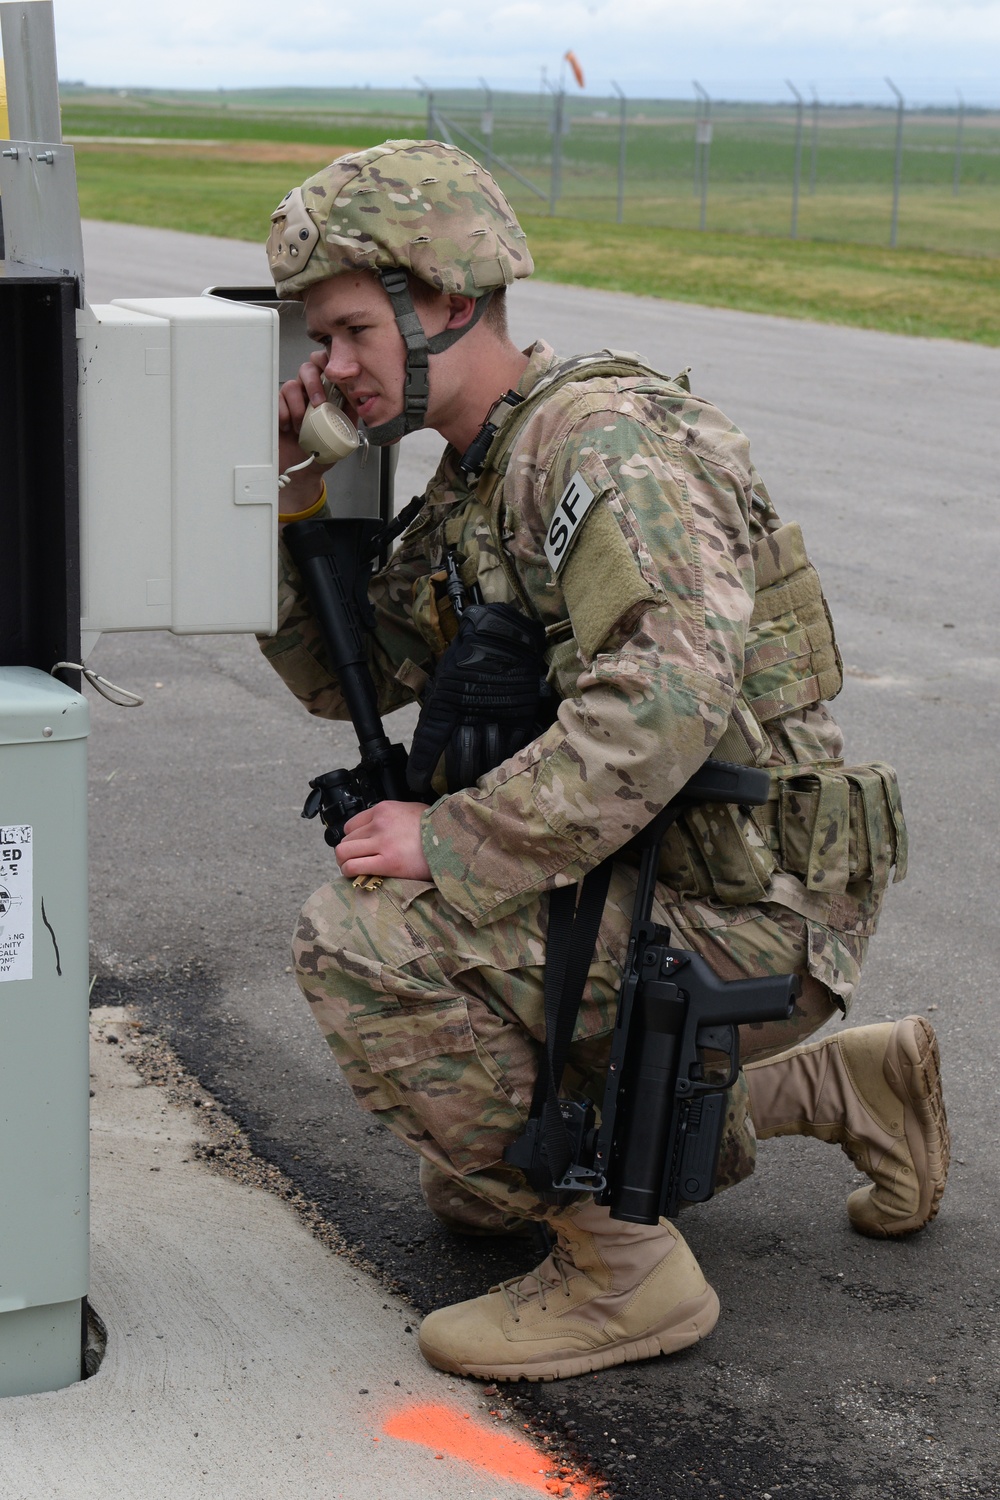 219th Security Forces Squadron contributes to total force at Minot AFB